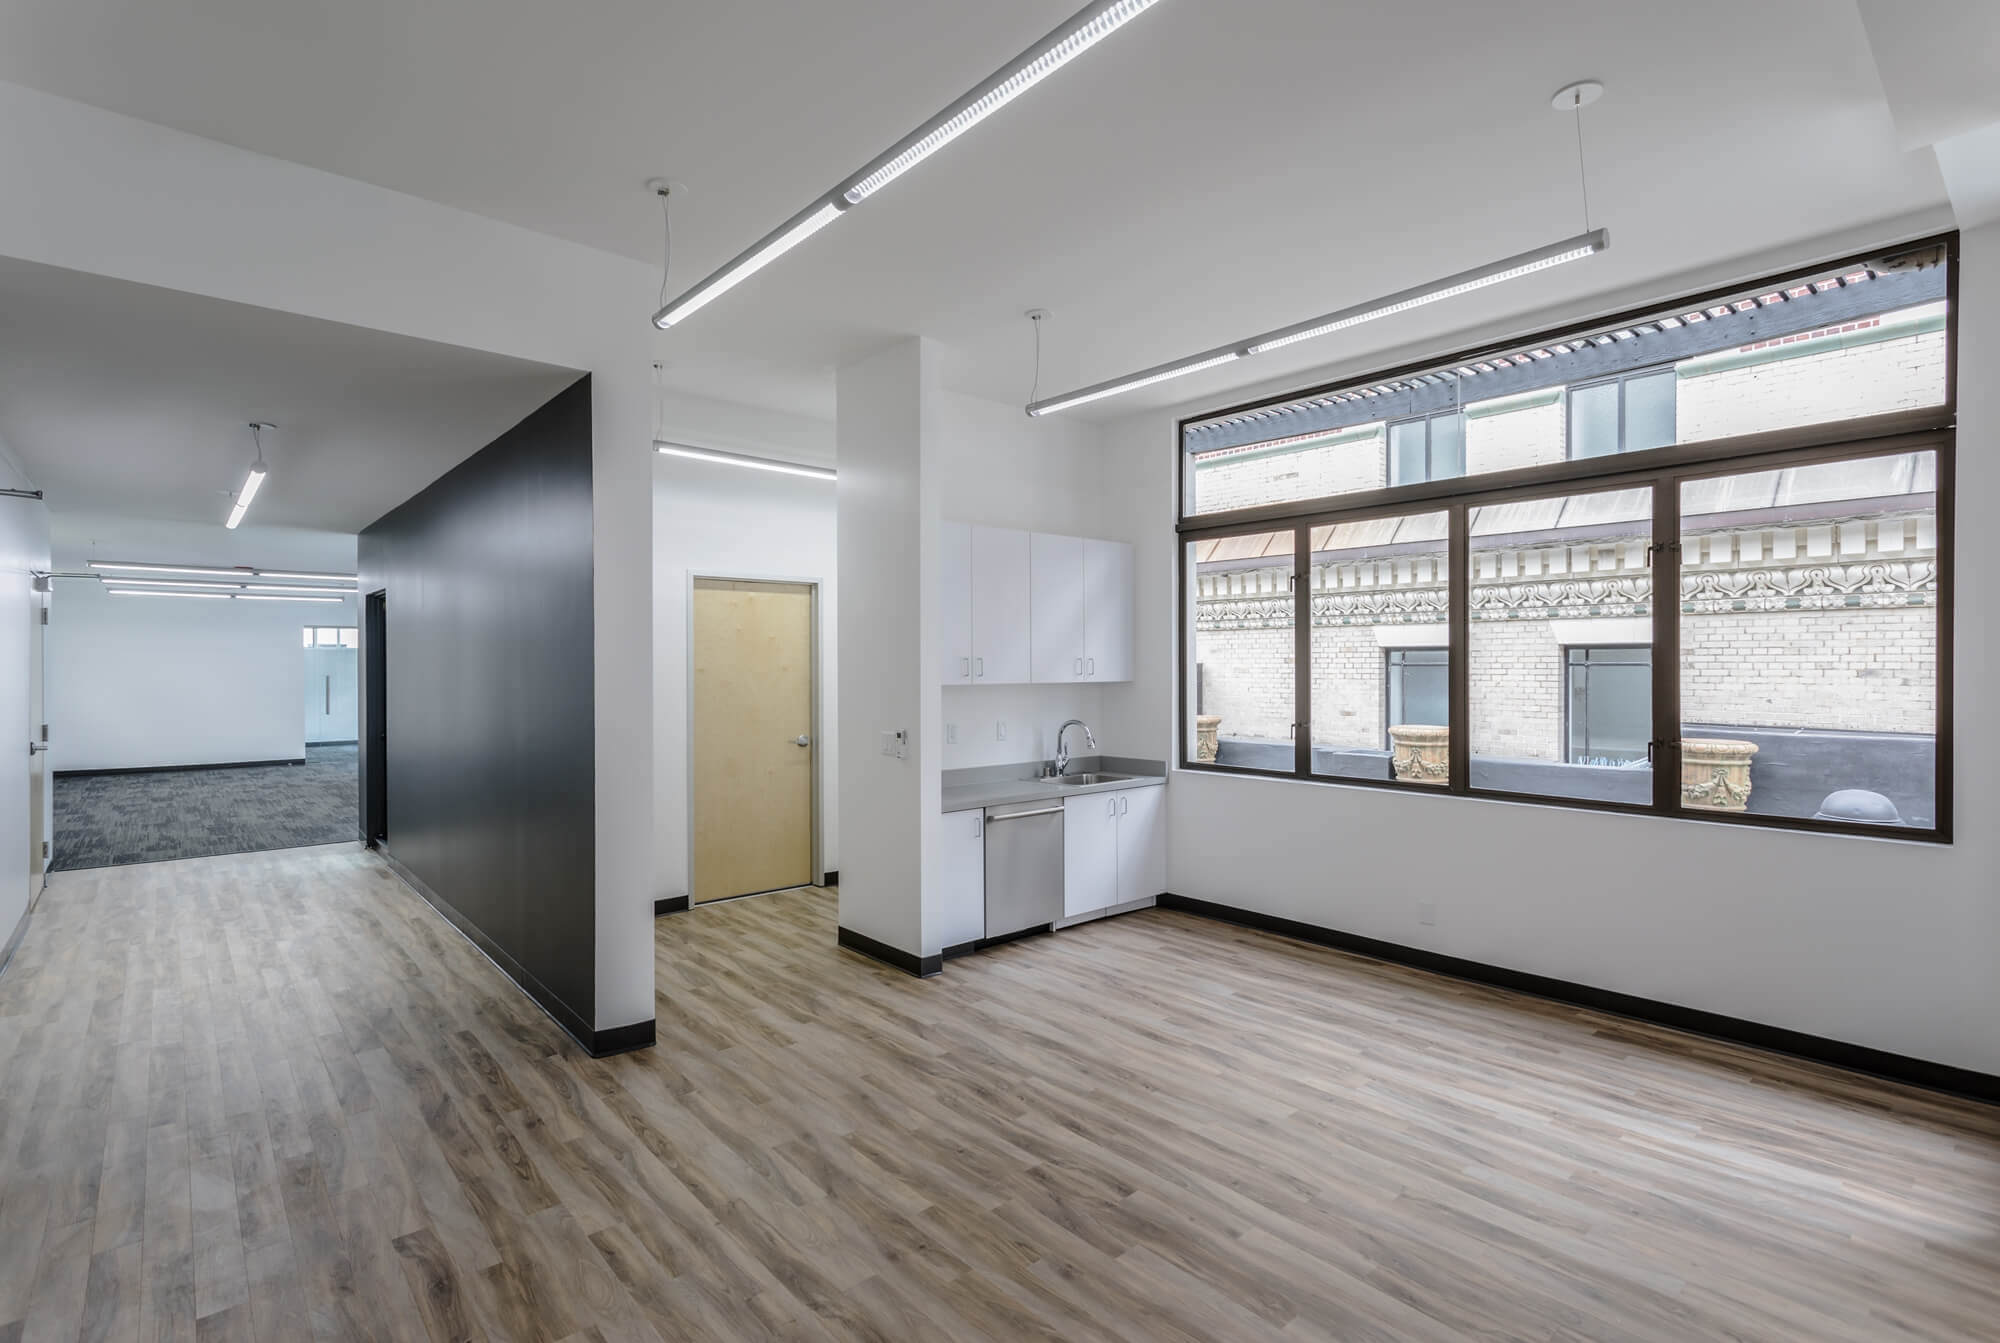 The Athletics san francisco office having a large room with wooden flooring and large glass window